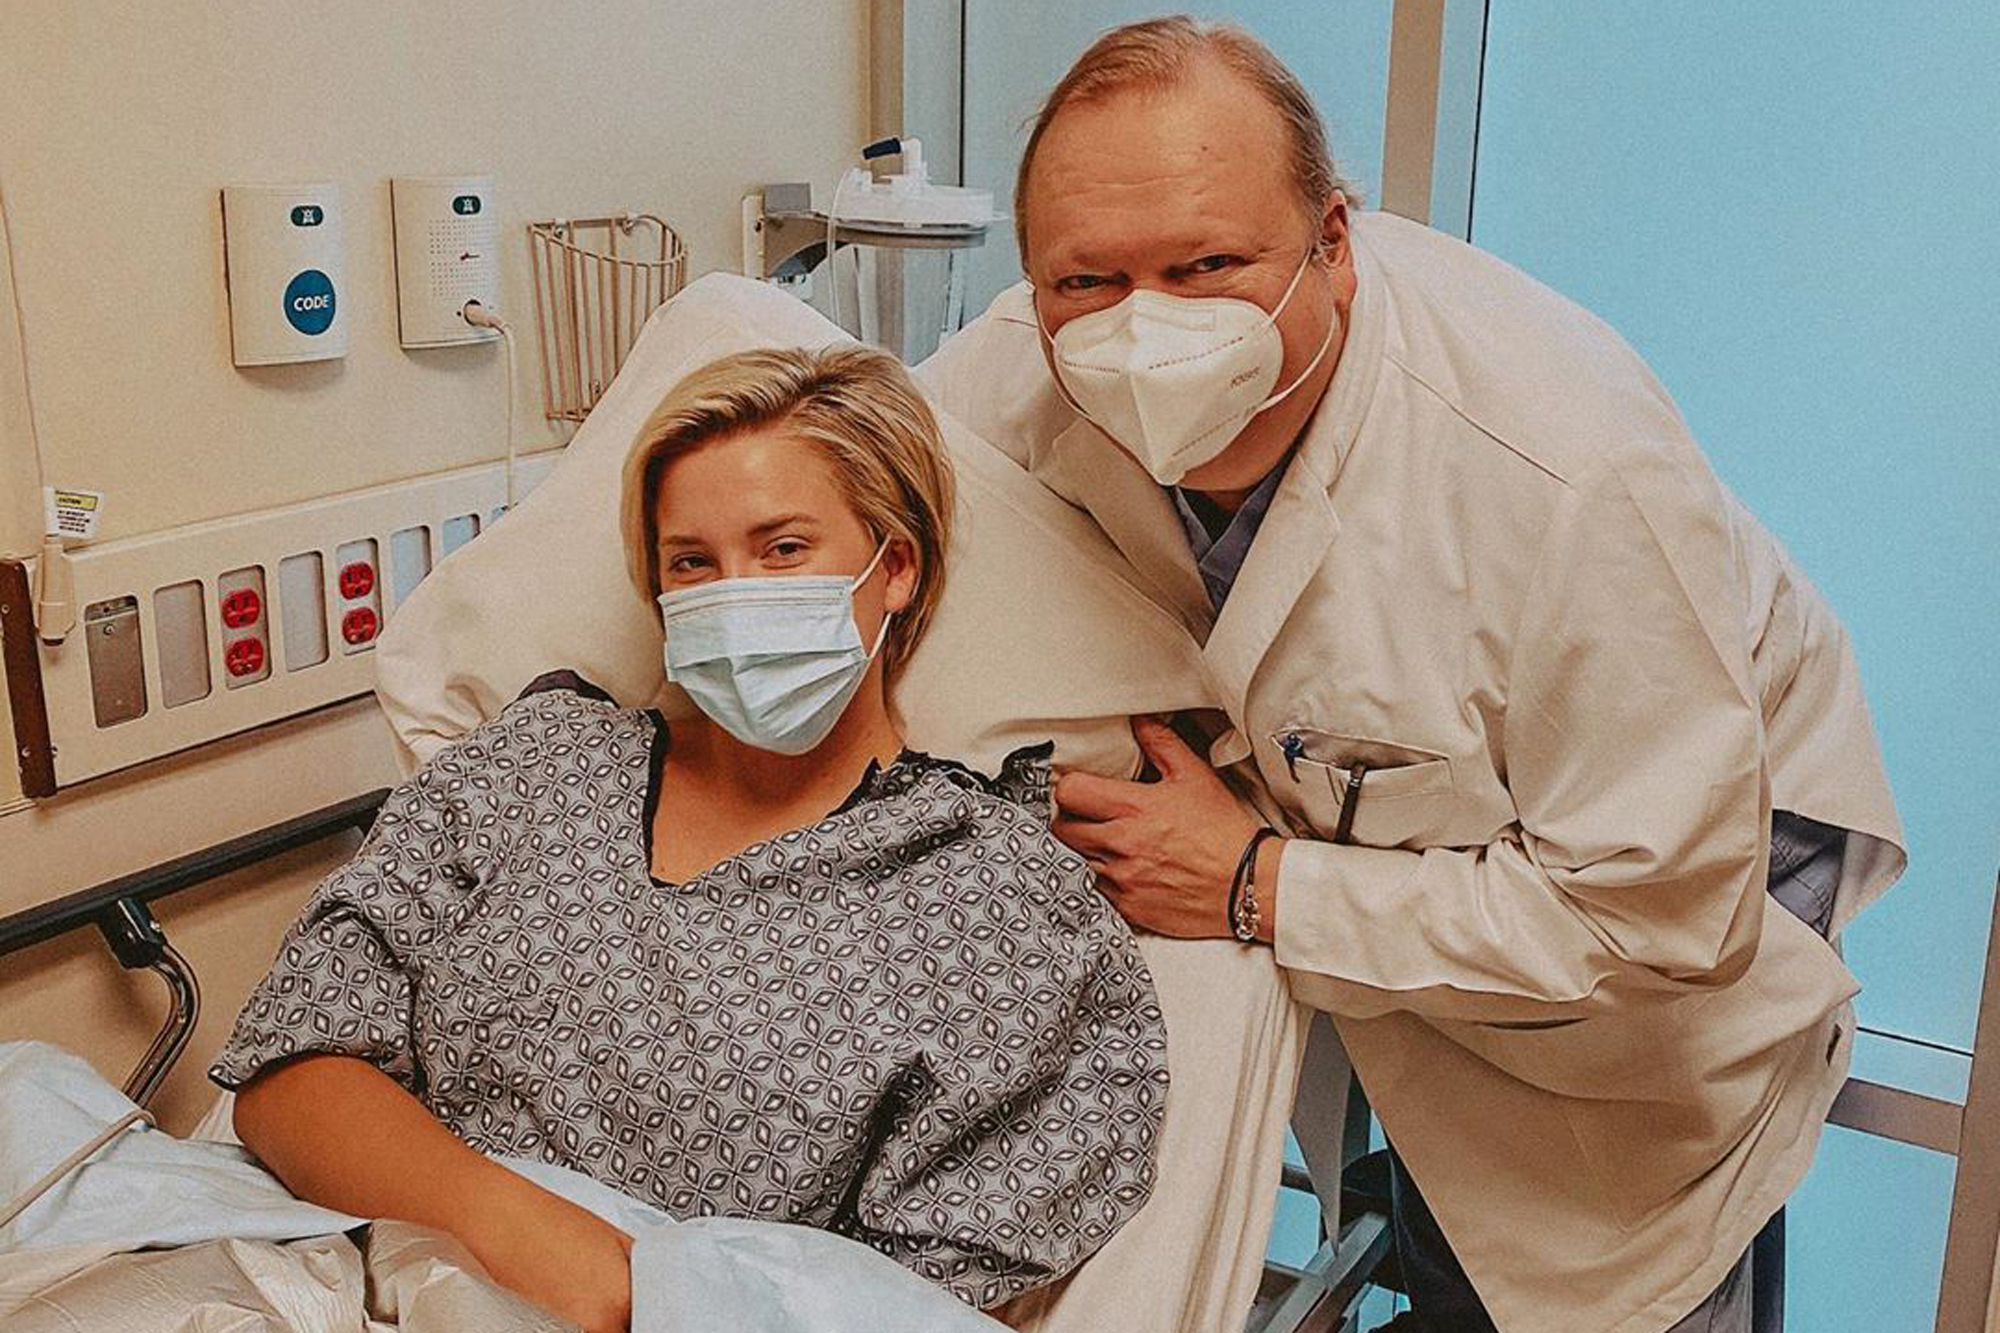 Savannah Chrisley has 'huge' cyst removed from her uterus